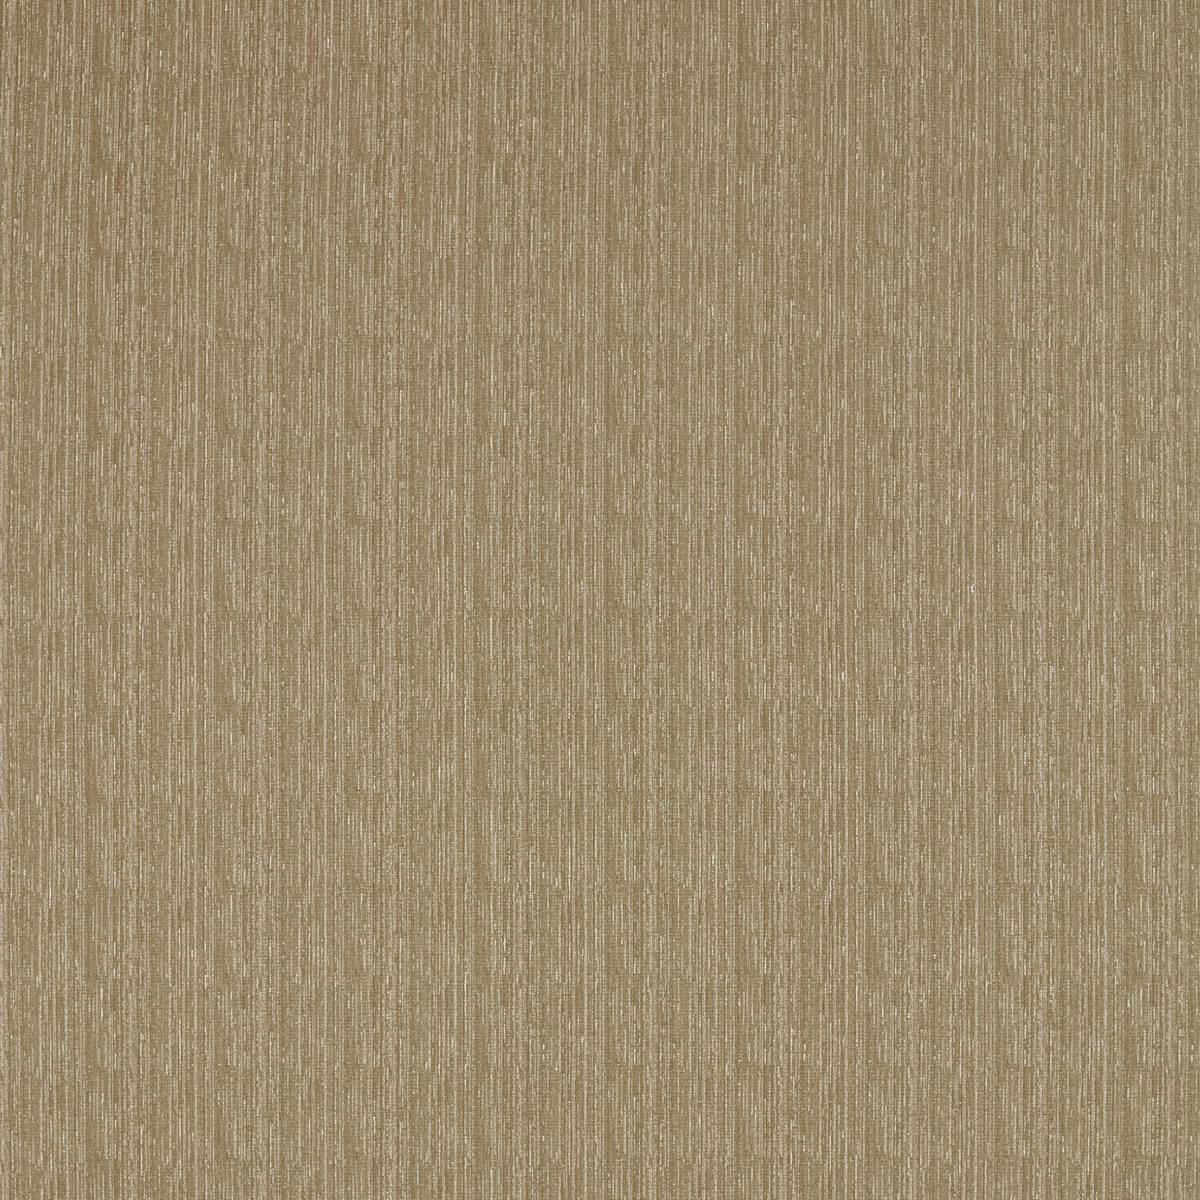 Spindlestone Gold Fabric by Sanderson